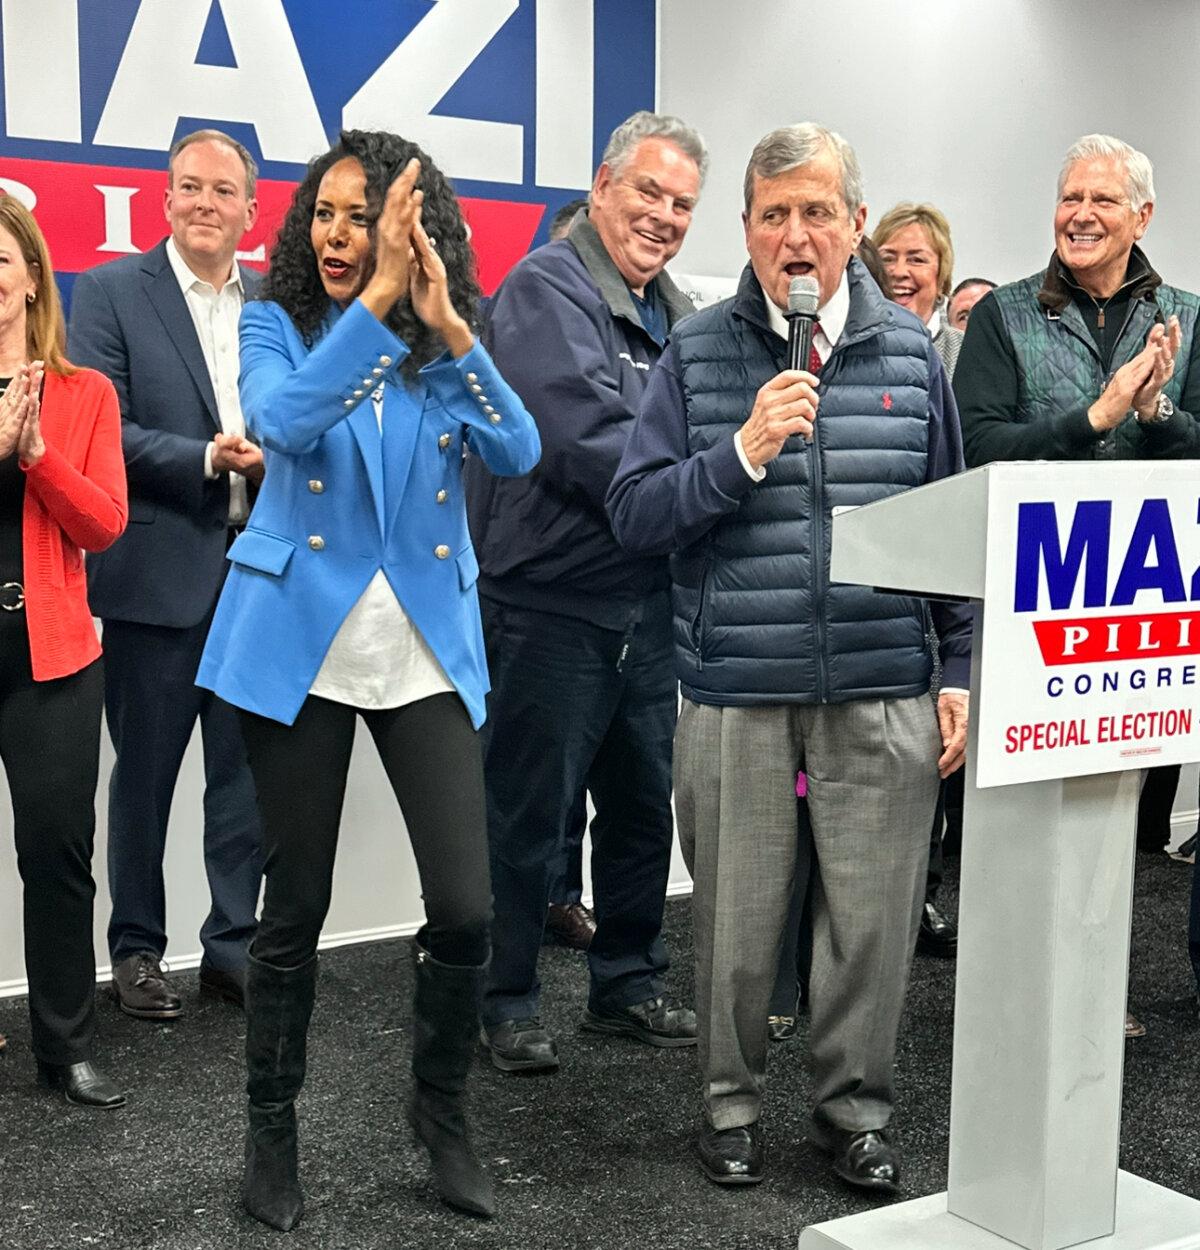 GOP Candidate Mazi Pilip celebrating at a rally in Franklin Square, N.Y., on Feb. 12, 2024, with Nassau County GOP Chair Joe Cairo, Lee Zeldin, former Congressman Peter King, and Nassau County Executive Bruce Blakeman. (Courtesy of Juliette Fairley)